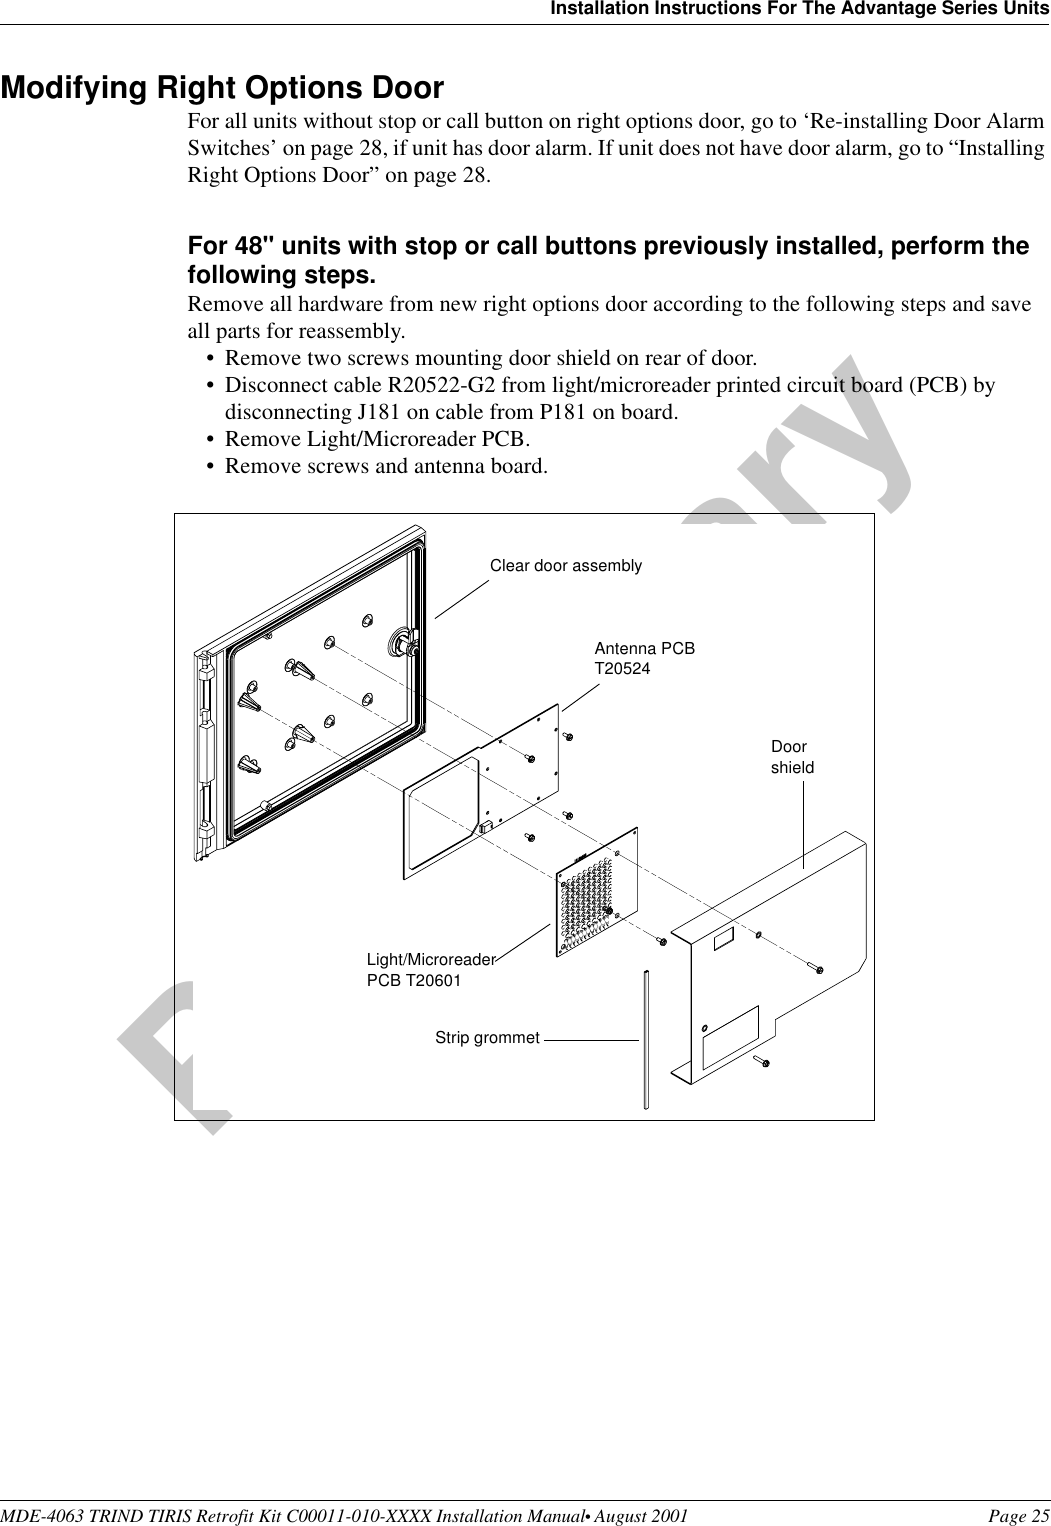 MDE-4063 TRIND TIRIS Retrofit Kit C00011-010-XXXX Installation Manual• August 2001 Page 25Installation Instructions For The Advantage Series UnitsPreliminary08-24-01Modifying Right Options DoorFor all units without stop or call button on right options door, go to ‘Re-installing Door Alarm Switches’ on page 28, if unit has door alarm. If unit does not have door alarm, go to “Installing Right Options Door” on page 28. For 48&quot; units with stop or call buttons previously installed, perform the following steps.Remove all hardware from new right options door according to the following steps and save all parts for reassembly.•Remove two screws mounting door shield on rear of door.•Disconnect cable R20522-G2 from light/microreader printed circuit board (PCB) by disconnecting J181 on cable from P181 on board.•Remove Light/Microreader PCB.•Remove screws and antenna board.DoorshieldAntenna PCB T20524Light/Microreader PCB T20601Strip grommetClear door assembly